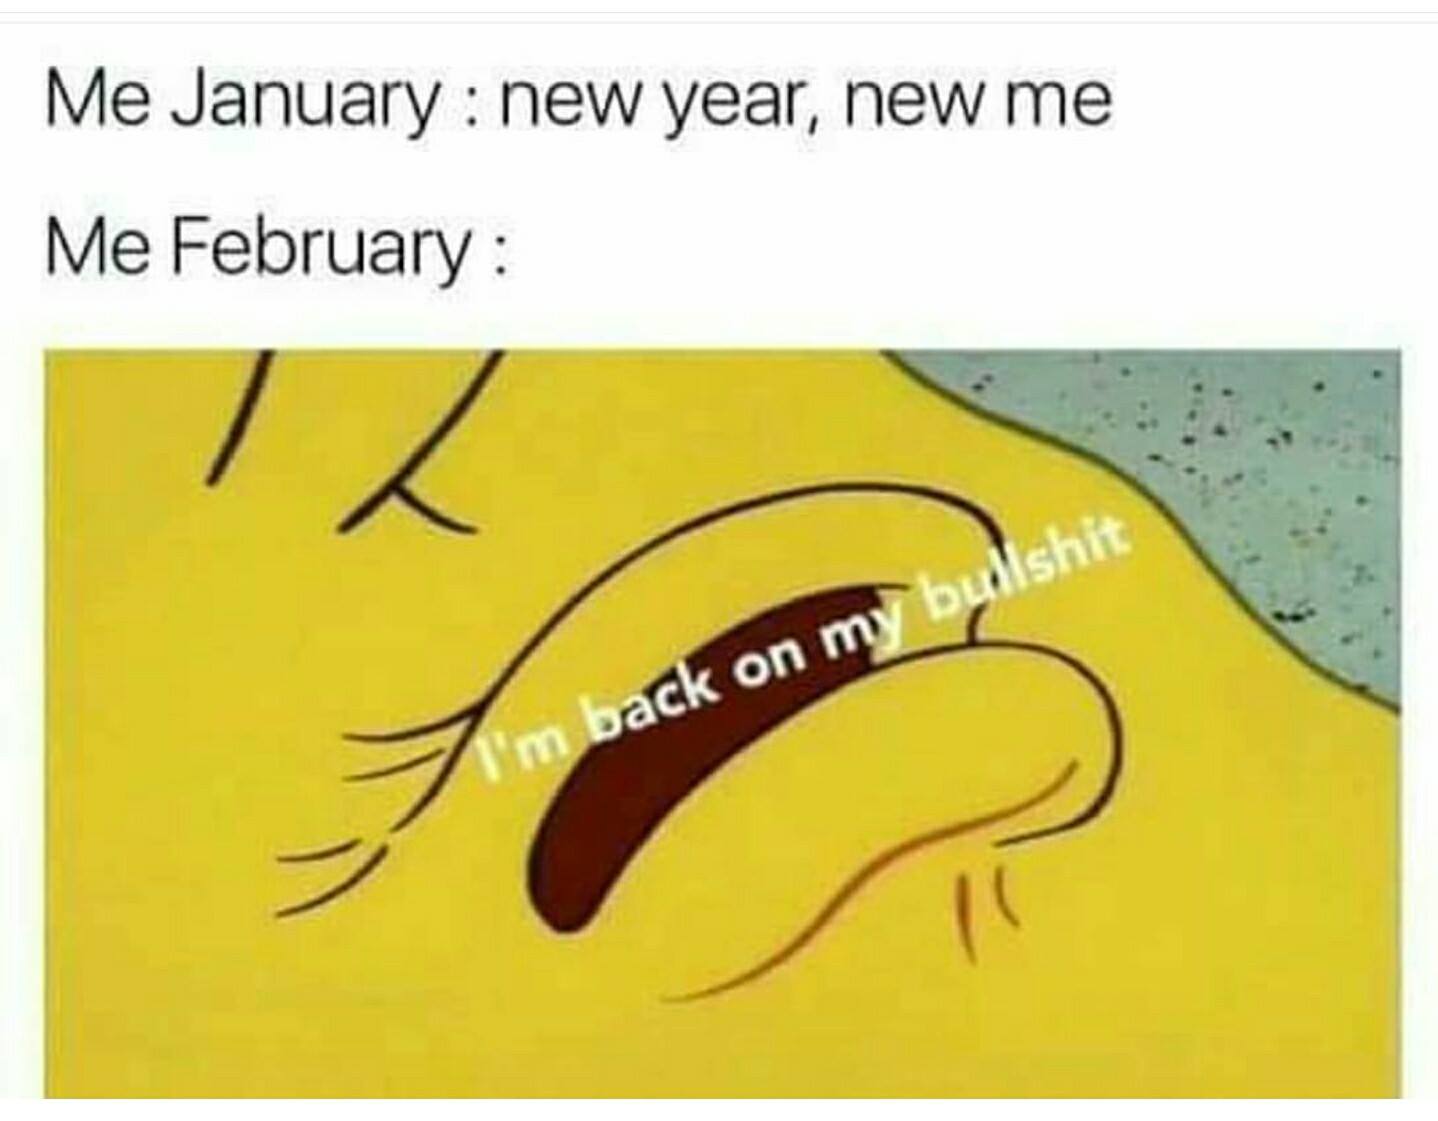 Tuesday meme about not following your new years resolution